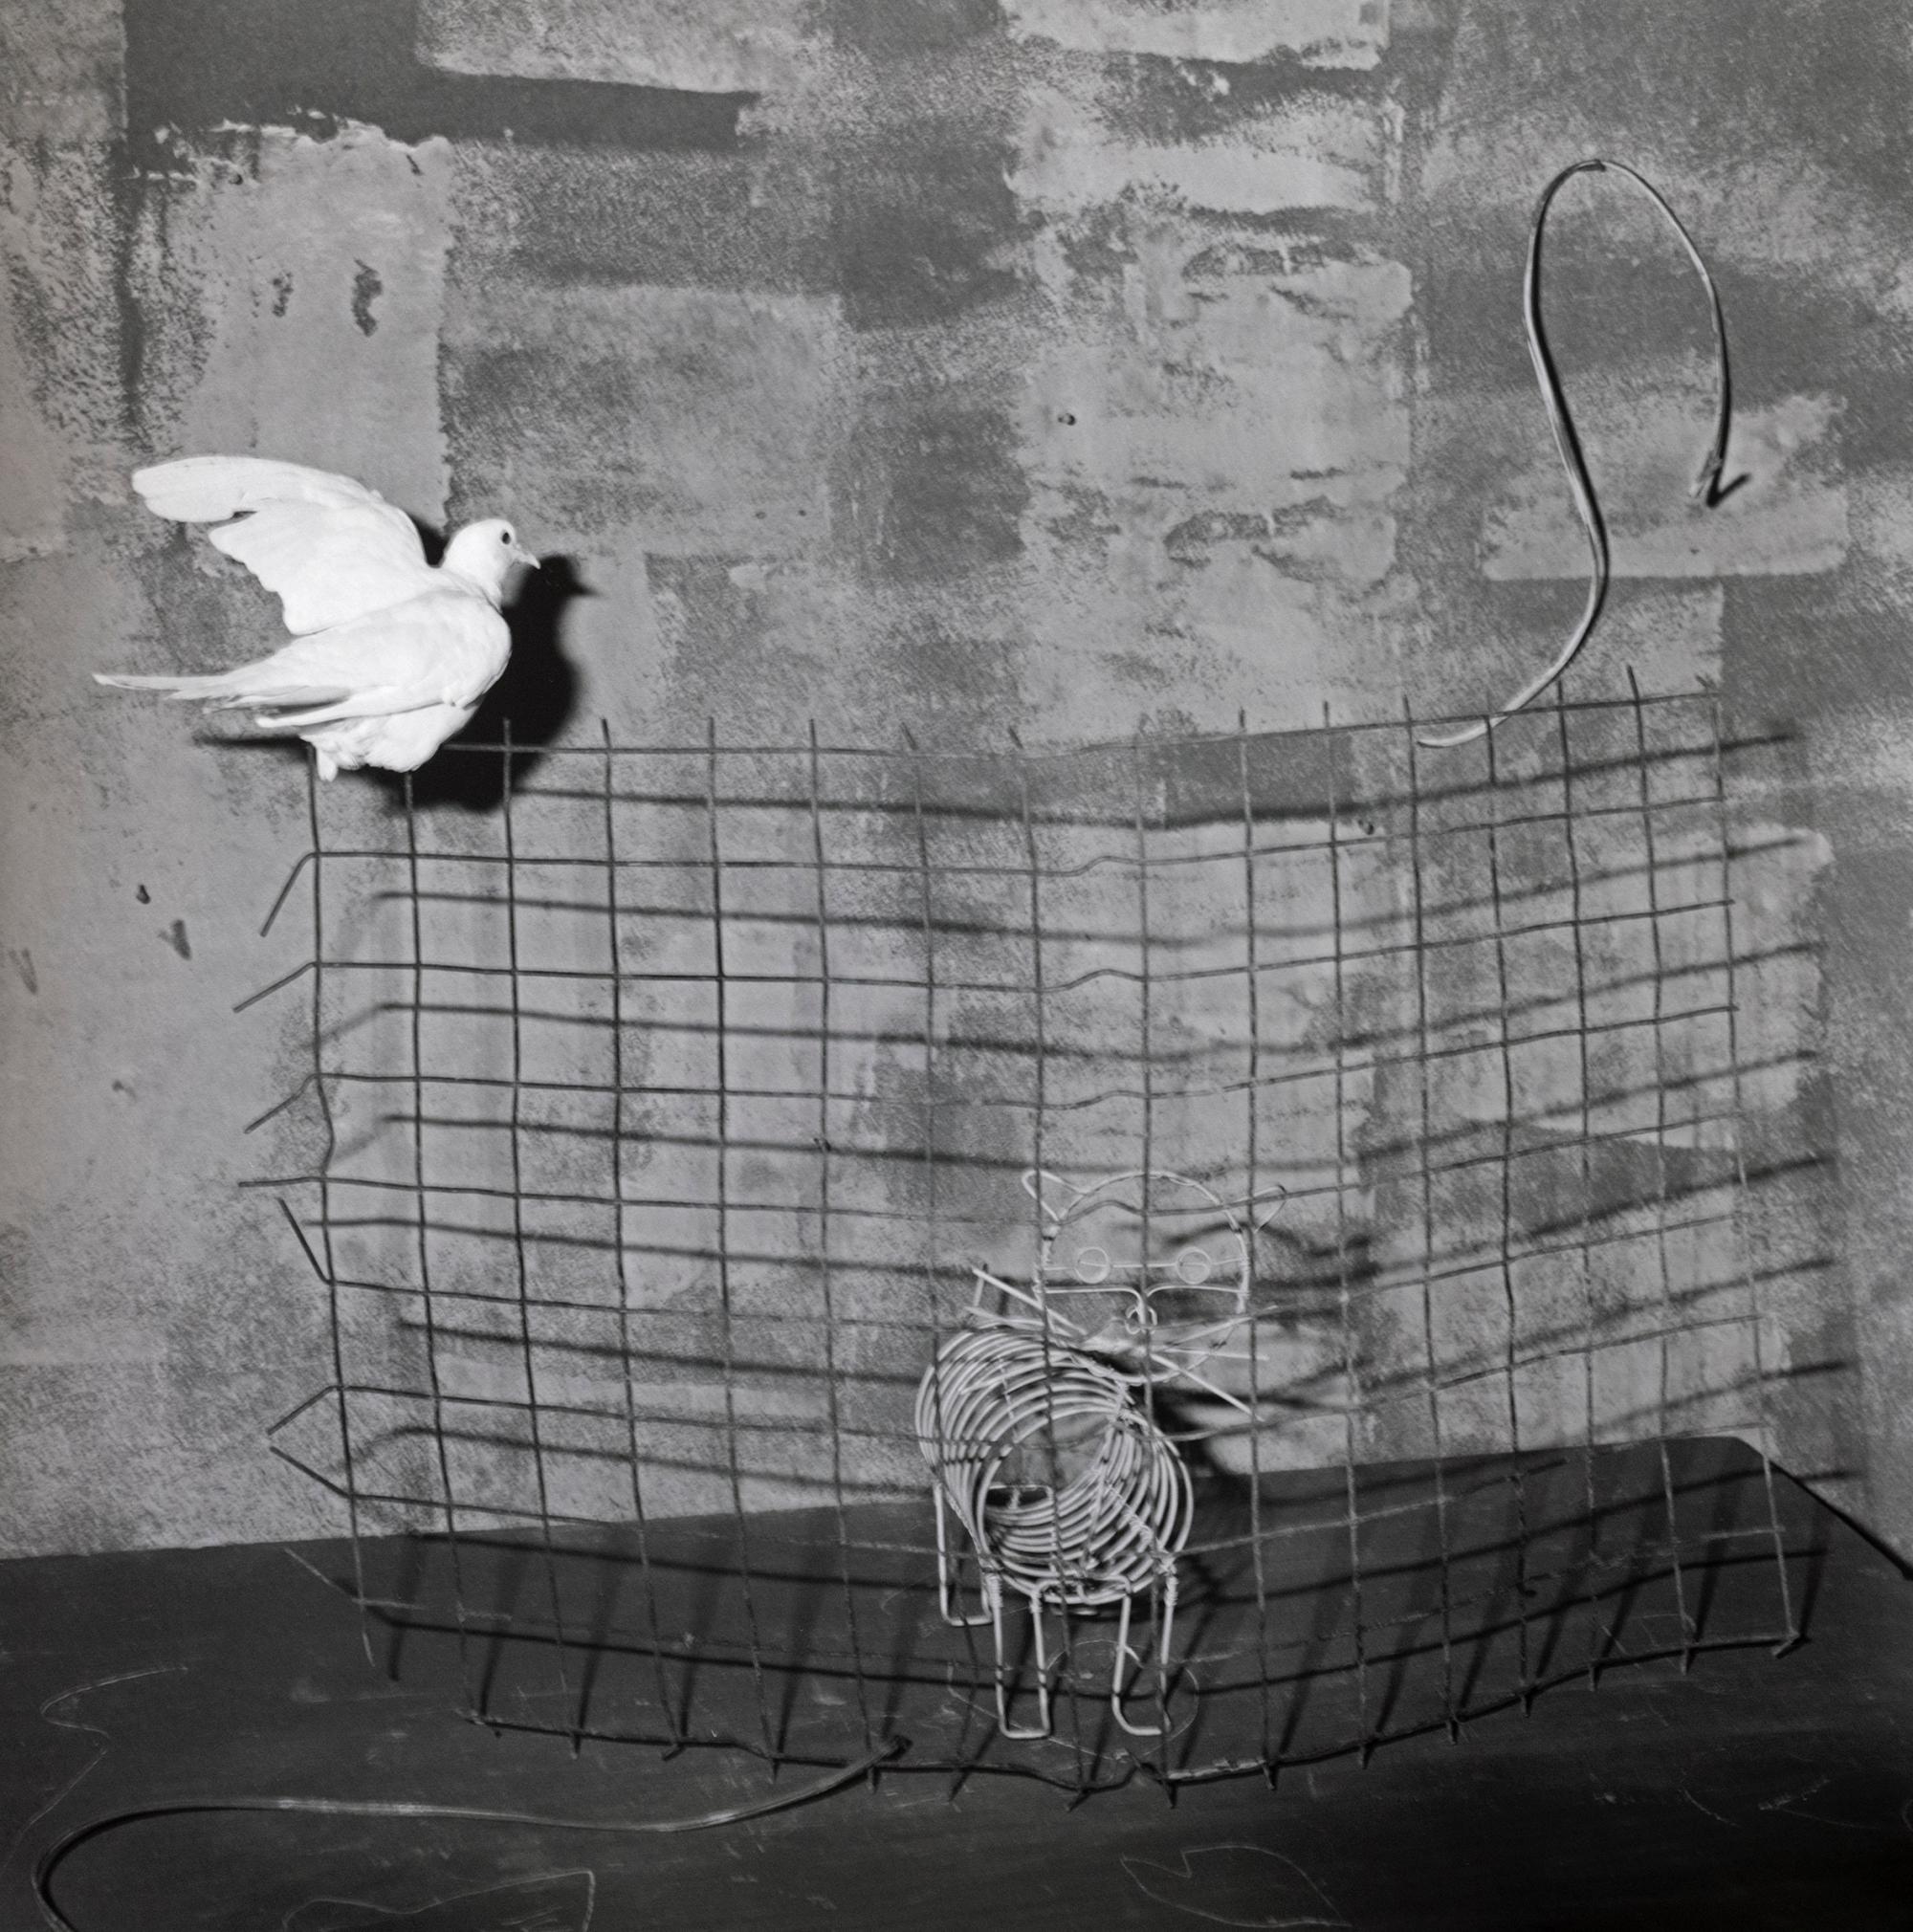 Roger BALLEN
Caged Cat, 2003
Vintage silver gelatin print
Image 36 x 36 cm (14 1/8 x 14 1/8 in.)
Sheet 40 x 40 cm (15 3/4 x 15 3/4 in.)
Edition of 5 (#2/5)
Signed and dated verso in pencil
Print only

Christophe Guye Galerie offers a selection of